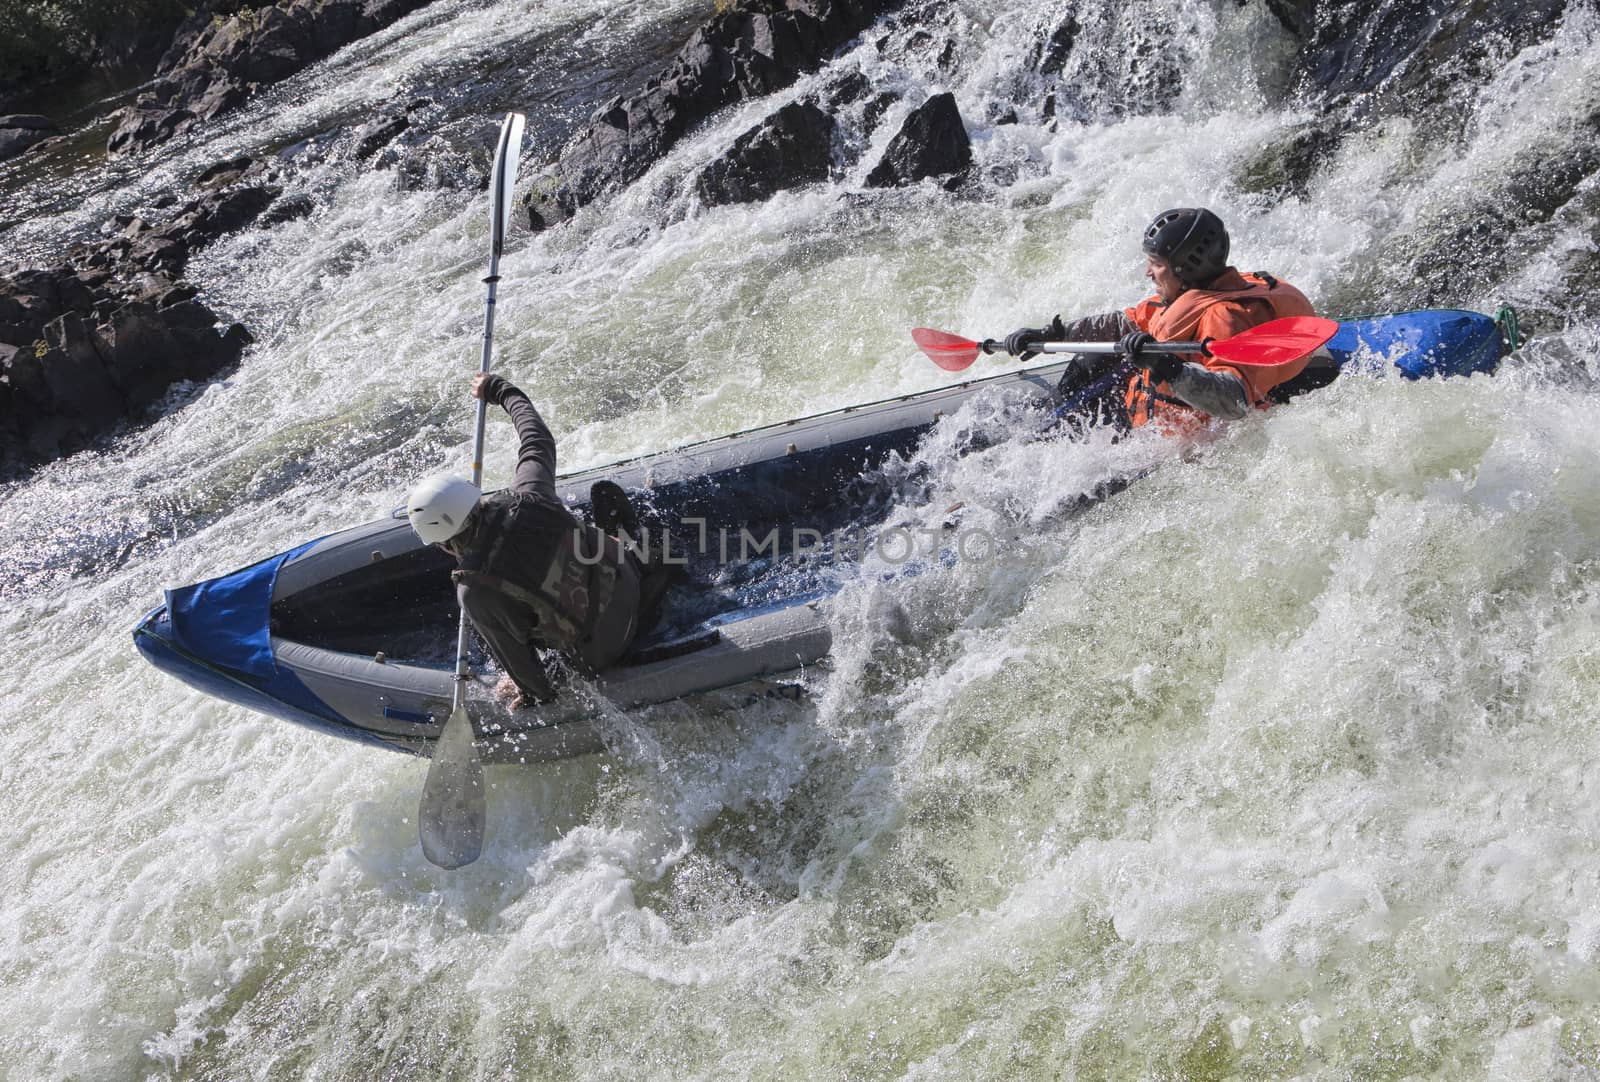 Kayakers in whitewater by Goodday